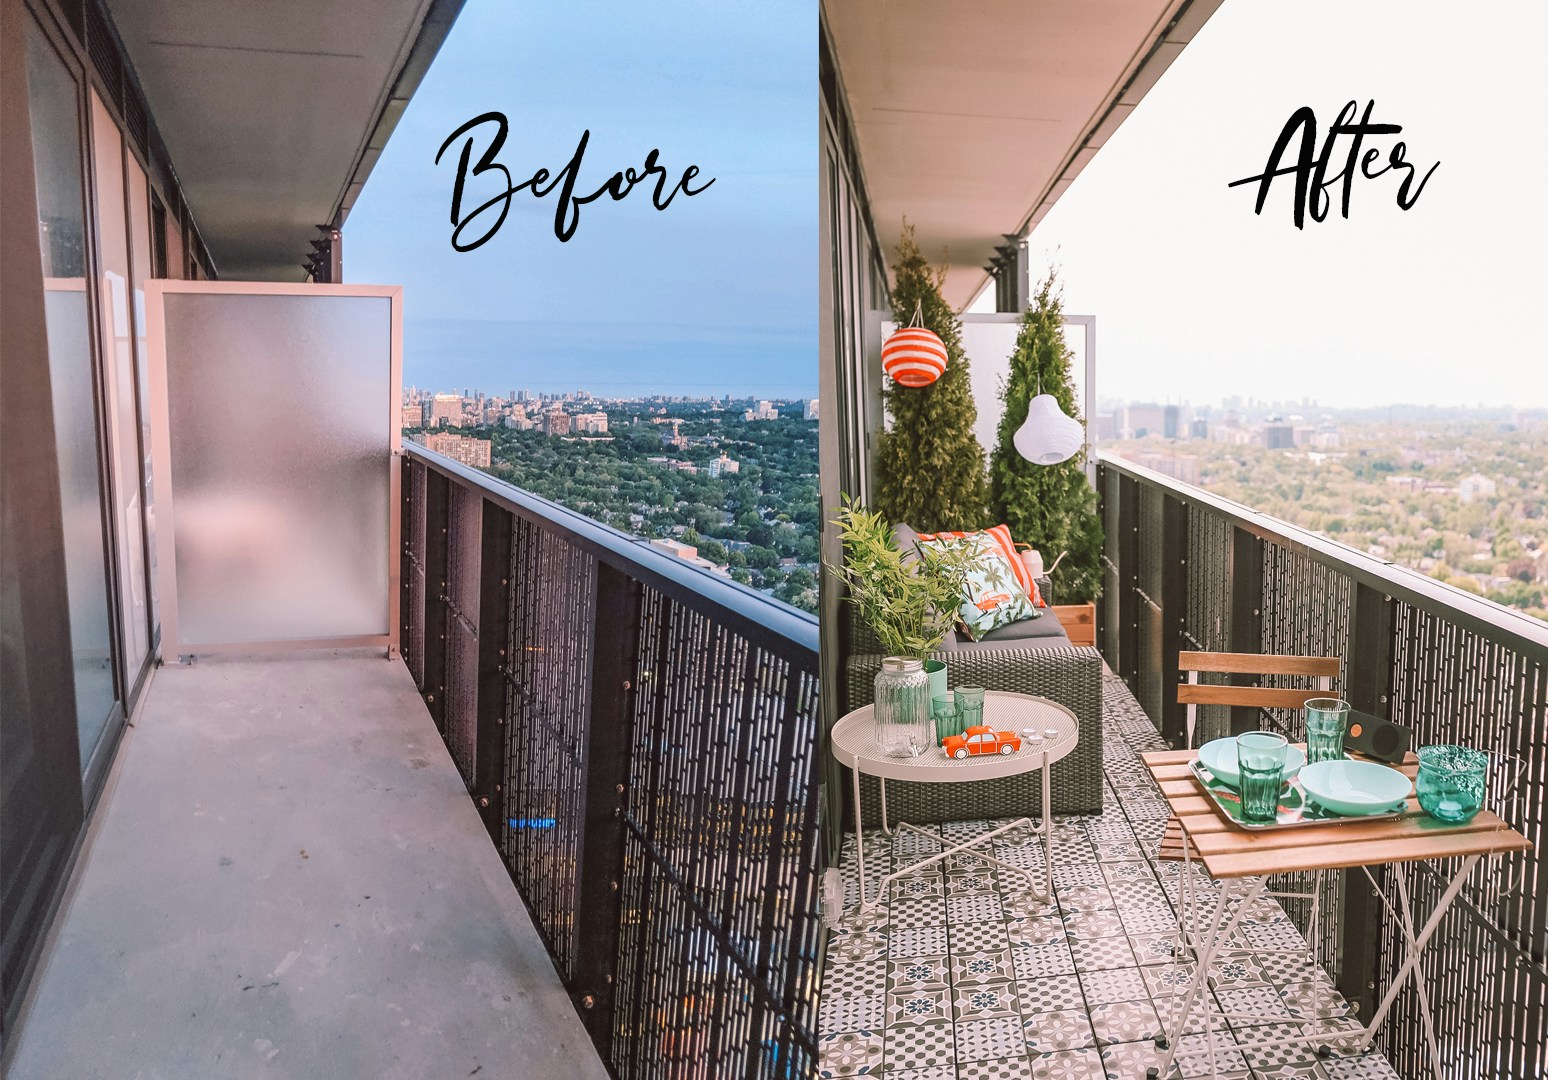 Before & After - Small Space Condo Balcony Makeover ft. IKEA Patio Furniture, including the Solleron series sofa, Mallsten decking, Krokholmen coffee table, Tarno bistro set and more!